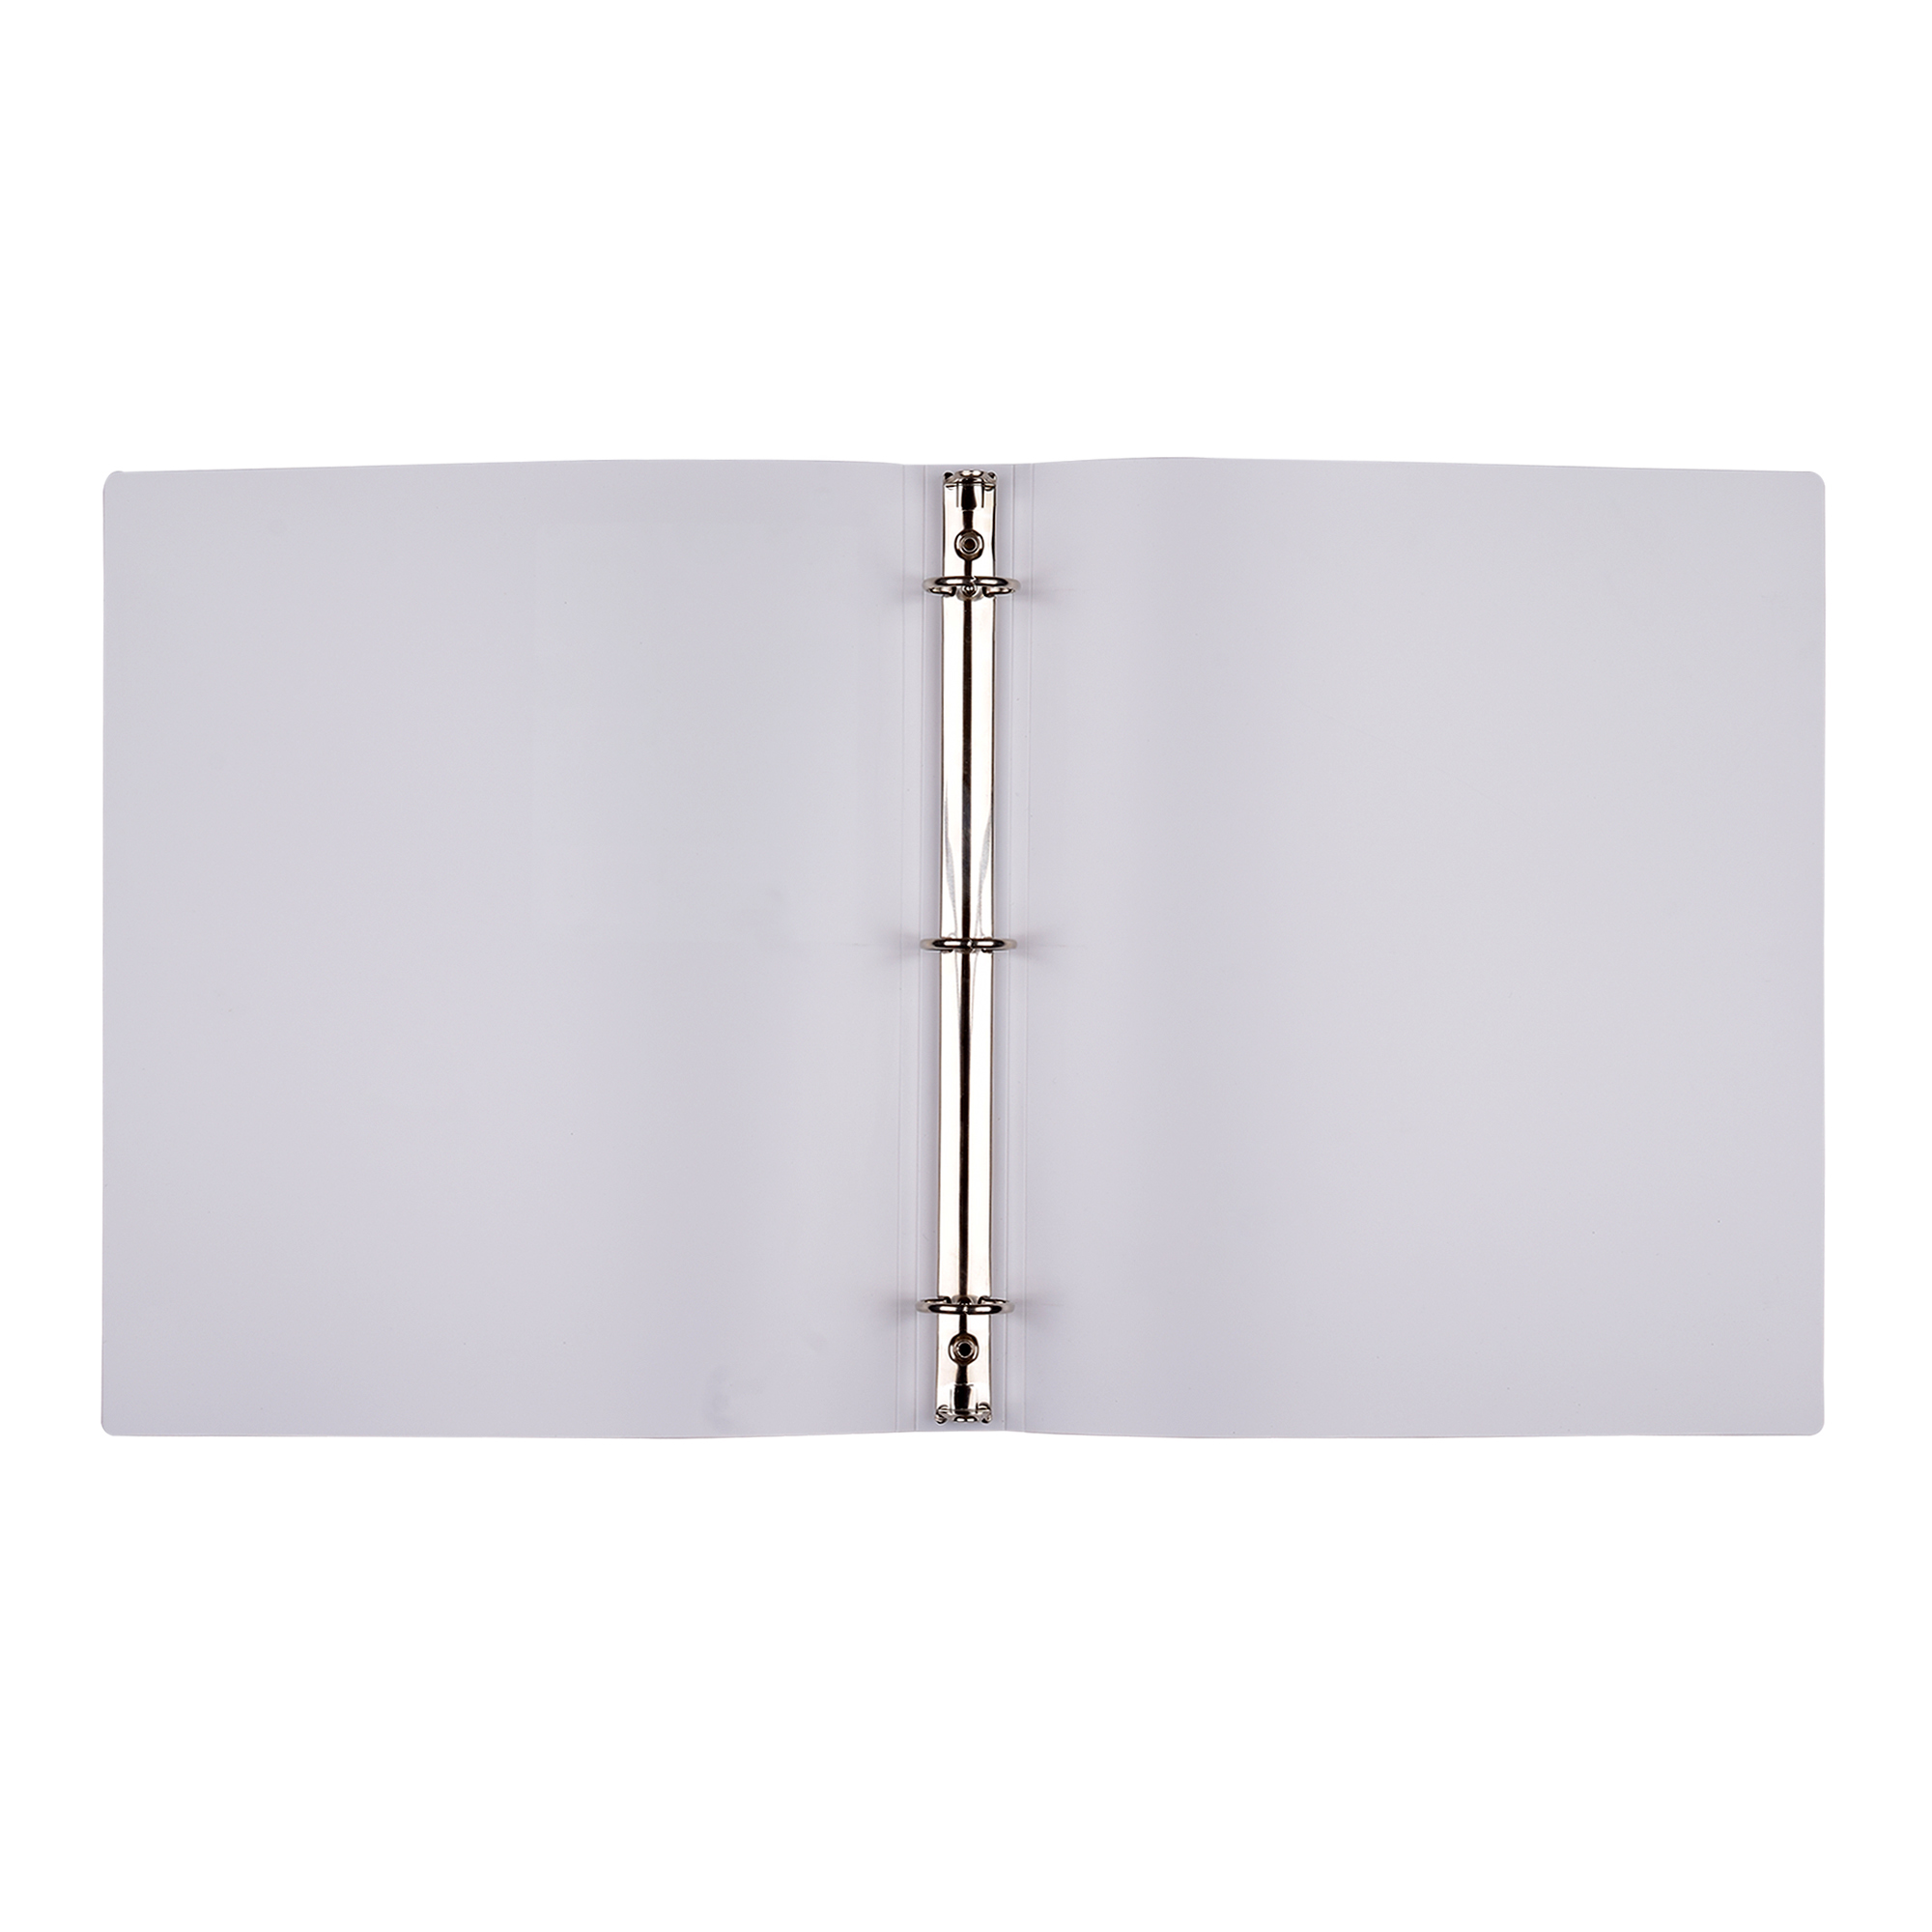 Pen + Gear 1" Standard 3-Ring Poly Binder, White Color, 1 inch "O Ring", Letter Size - image 5 of 5